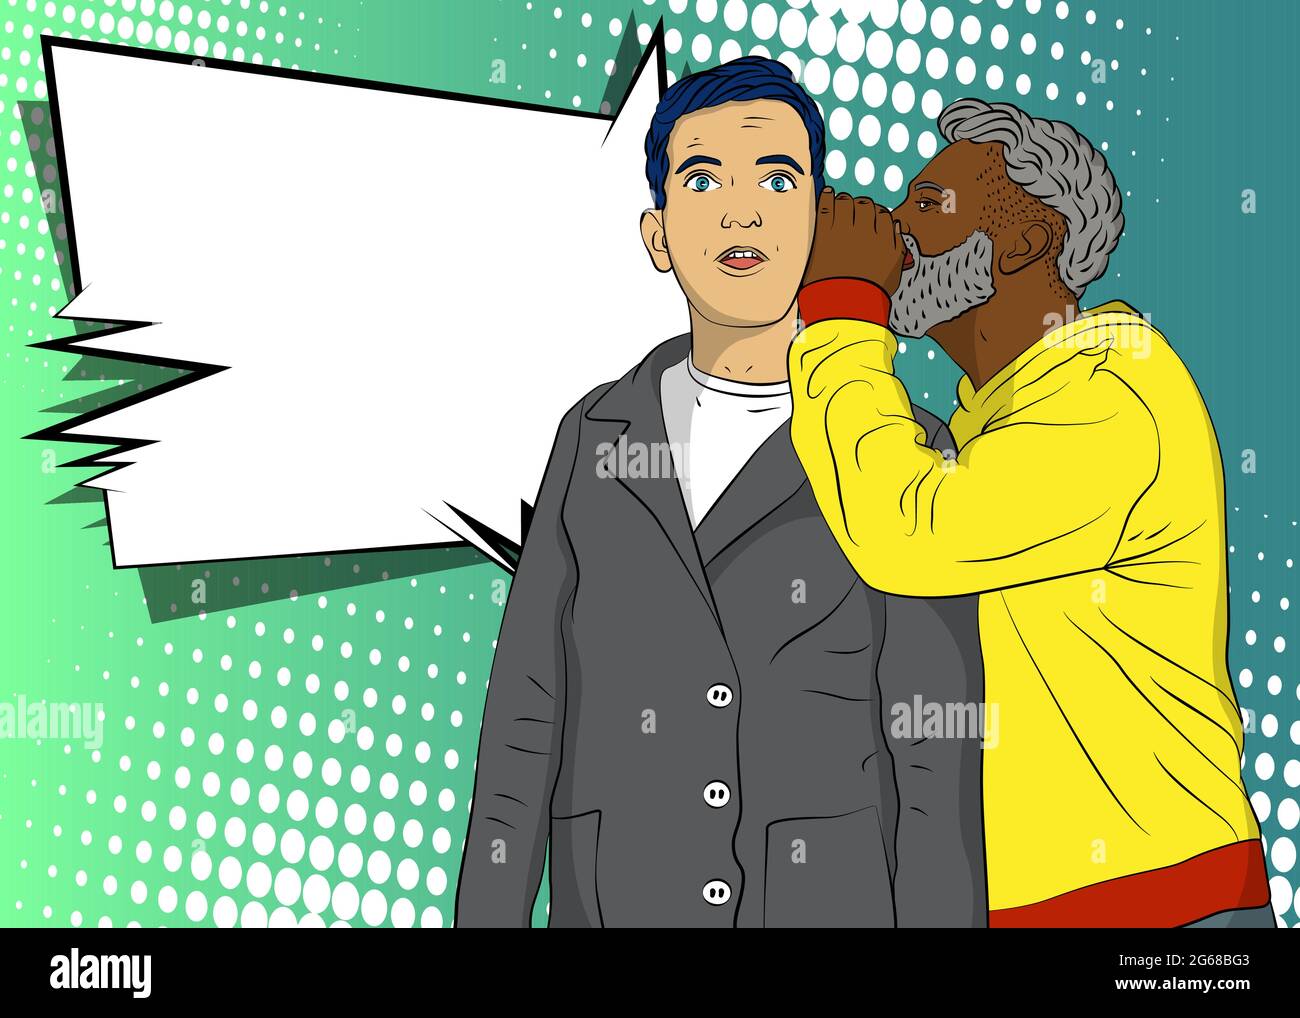 African-American man whispering to his Caucasian coworker, sharing secret gossips into his ear. Comic book style vector illustration. Stock Vector